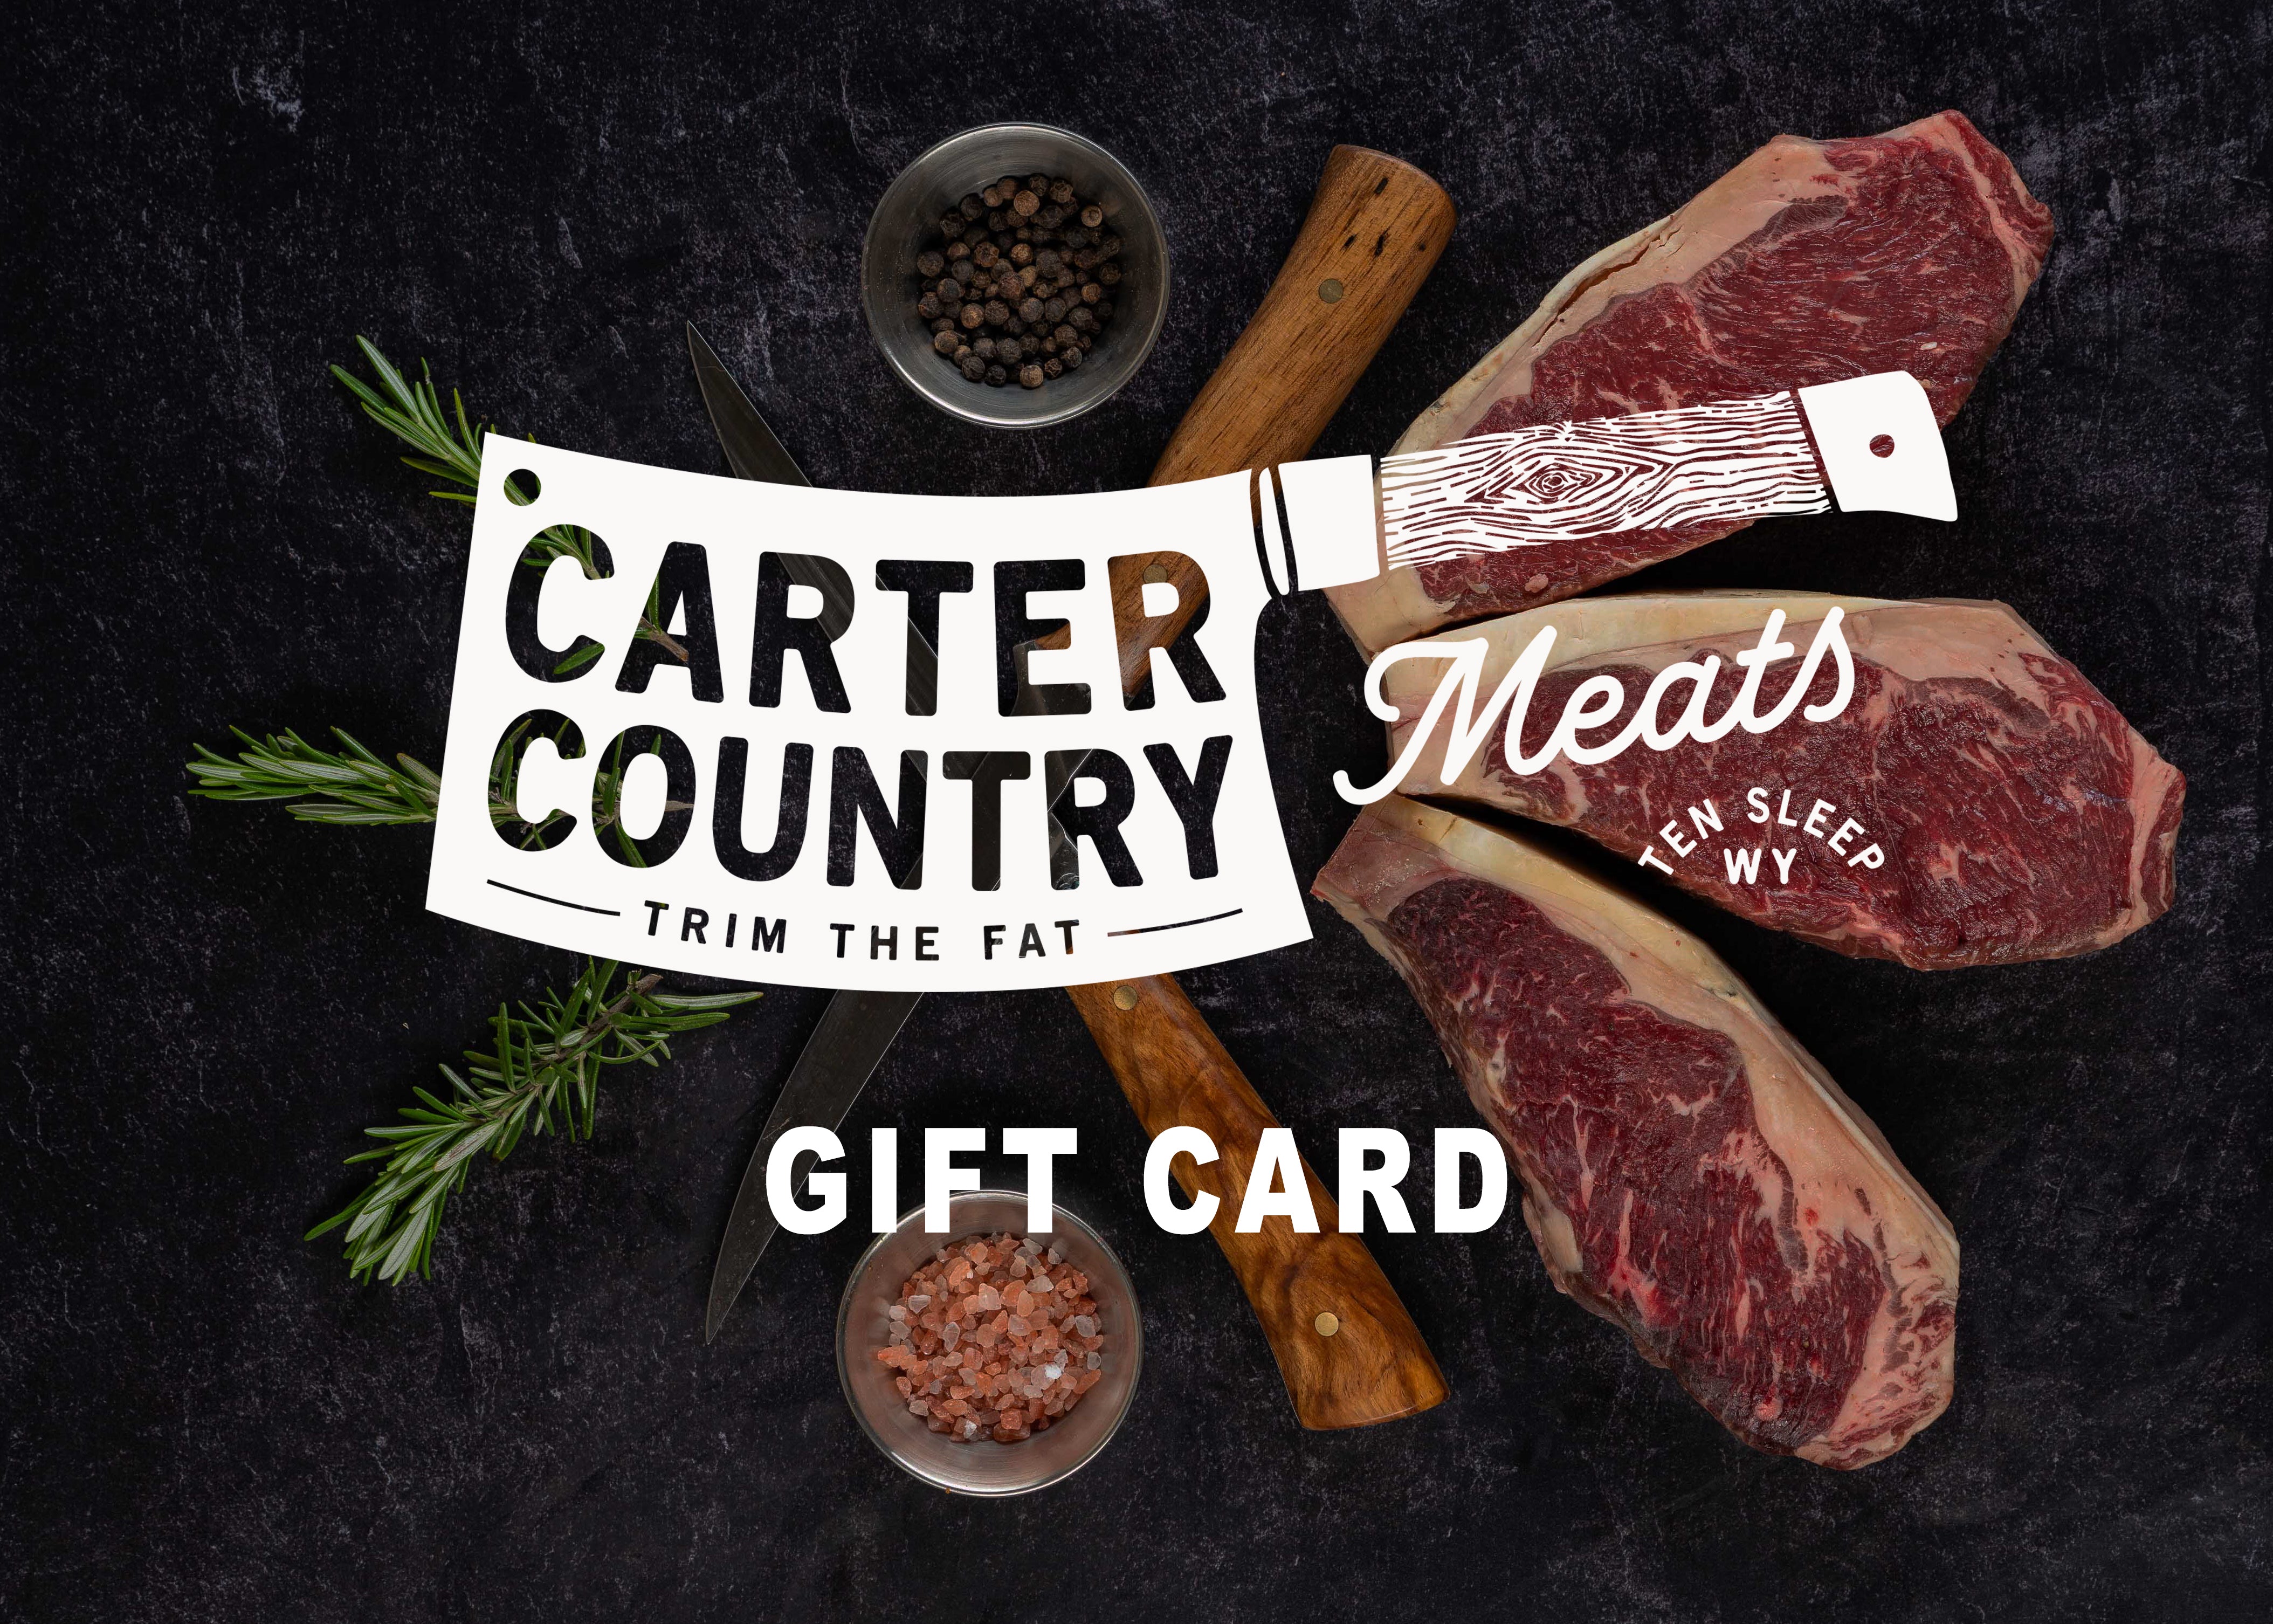 Carter Country Meats Gift Card – CarterCountryMeats